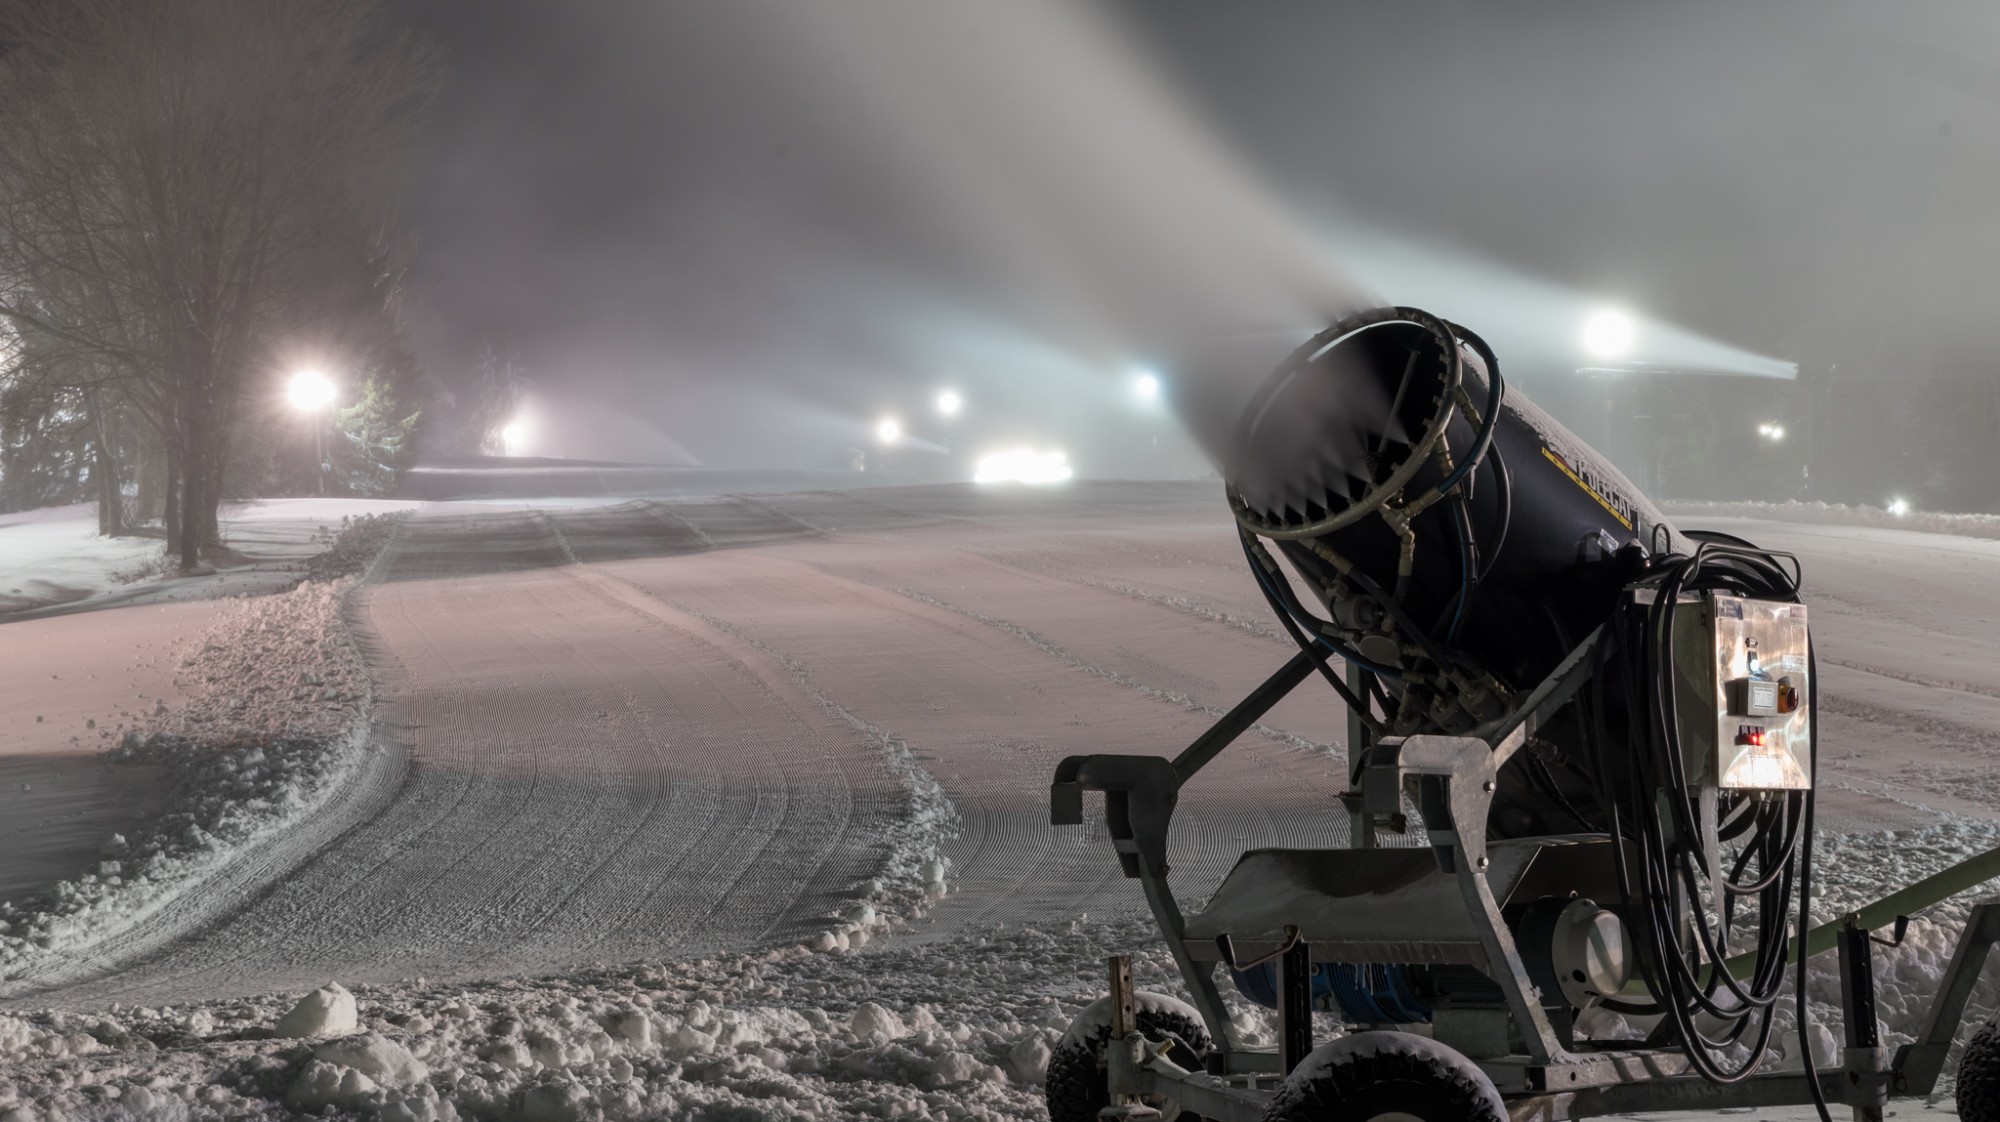 Snowmaking in March at Snow Trails in Mansfield, Ohio